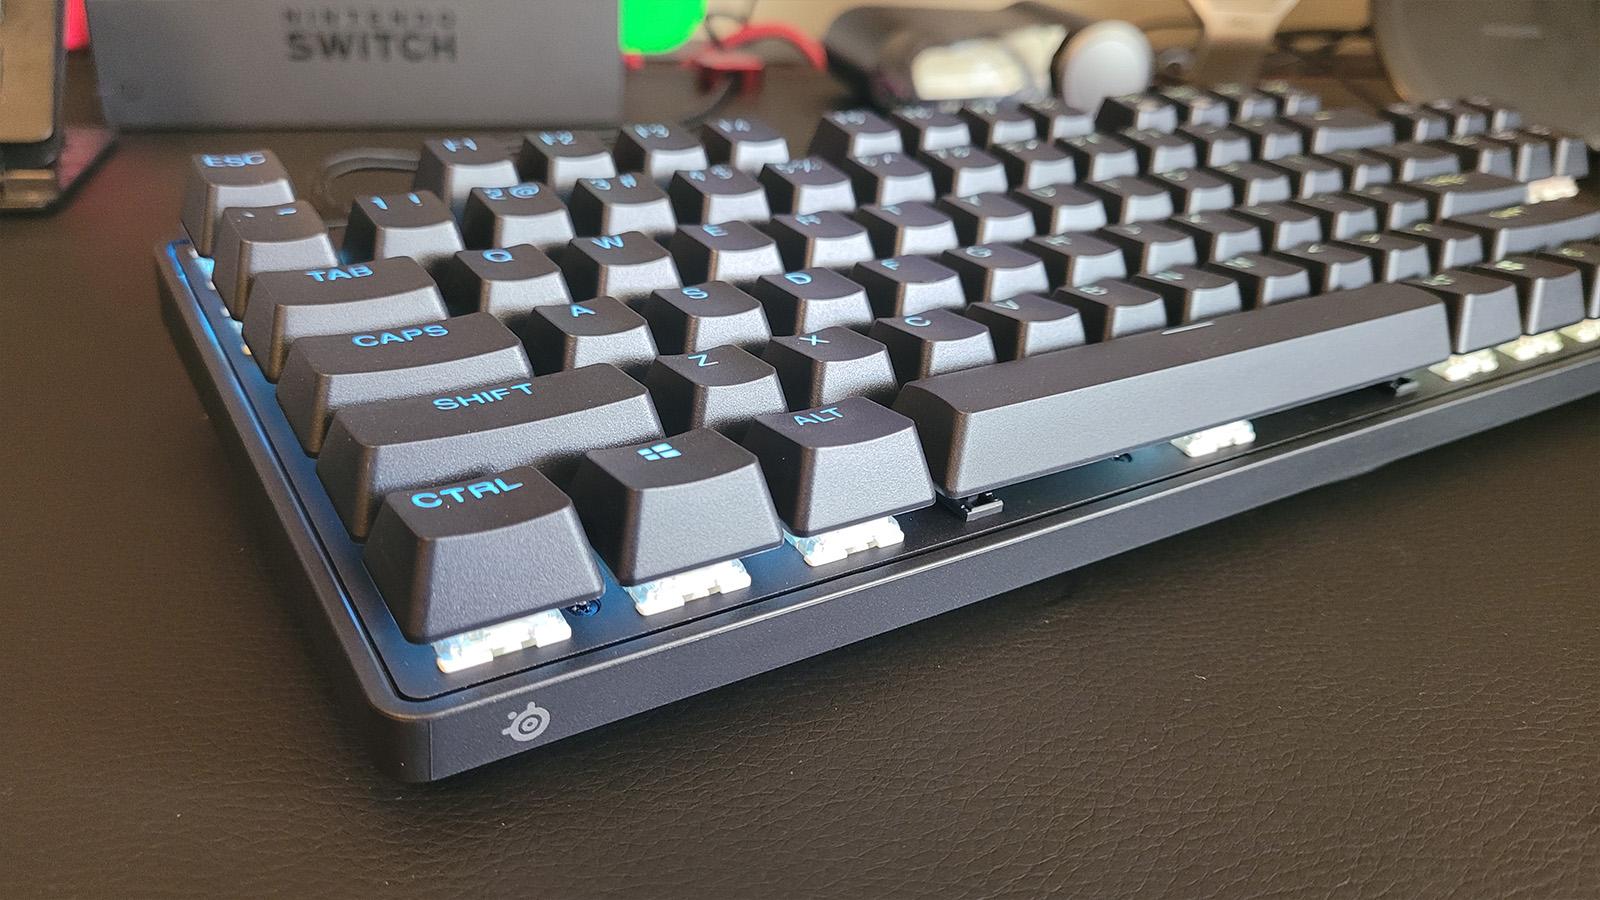 Build a PC for Keyboard SteelSeries Apex 9 Mini RGB Linear